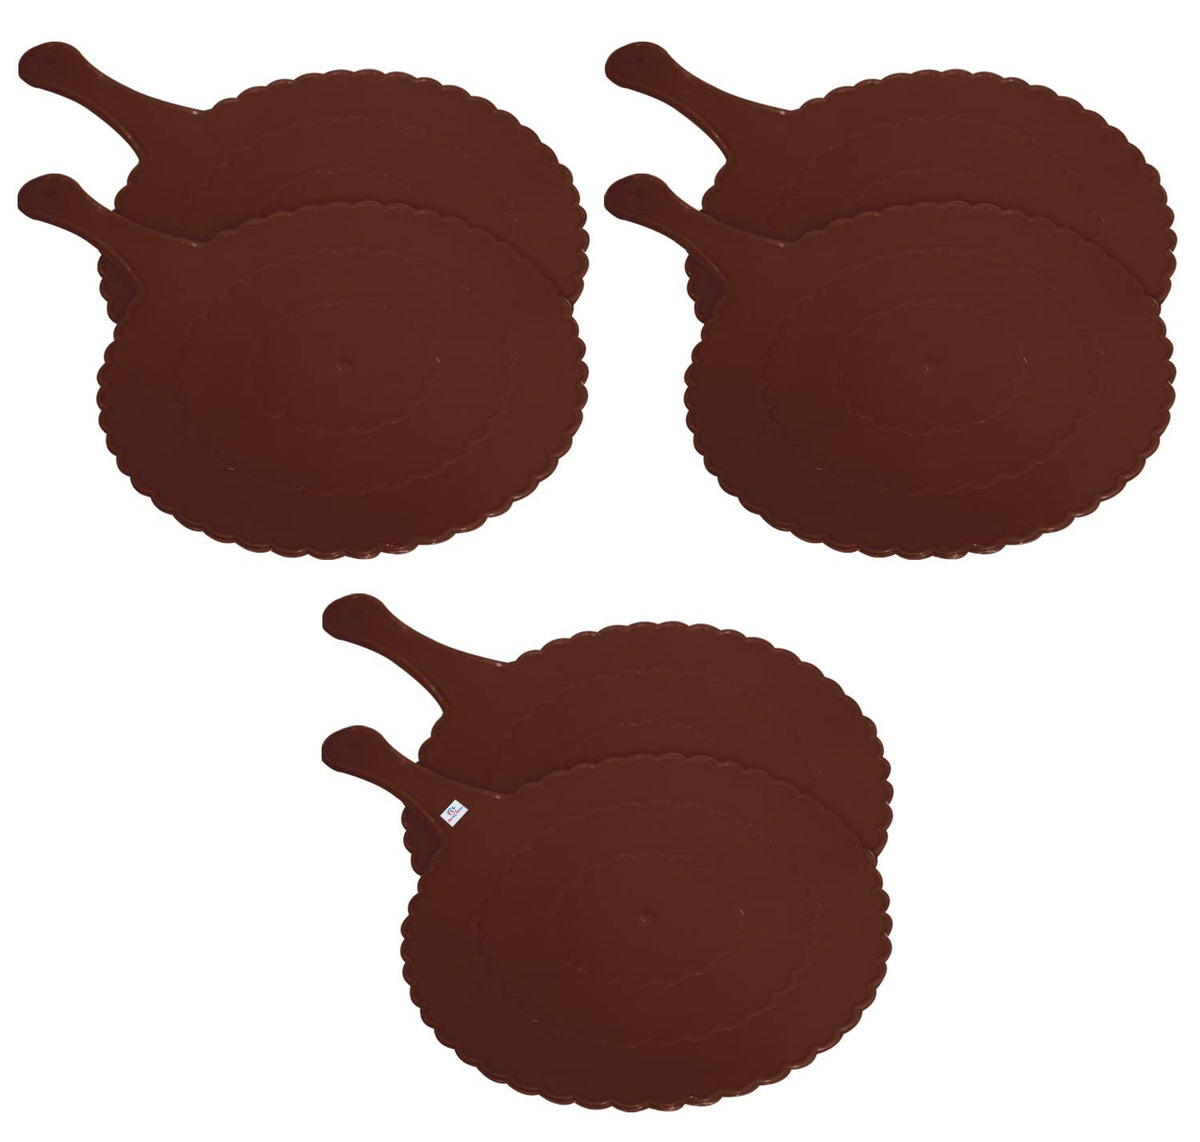 Heart Home Plastic Lightweight Handfan|Hath Pankha|Beejna for Natural Cooling Air Home Decor and Travel Useful, Pack of 6 (Brown)